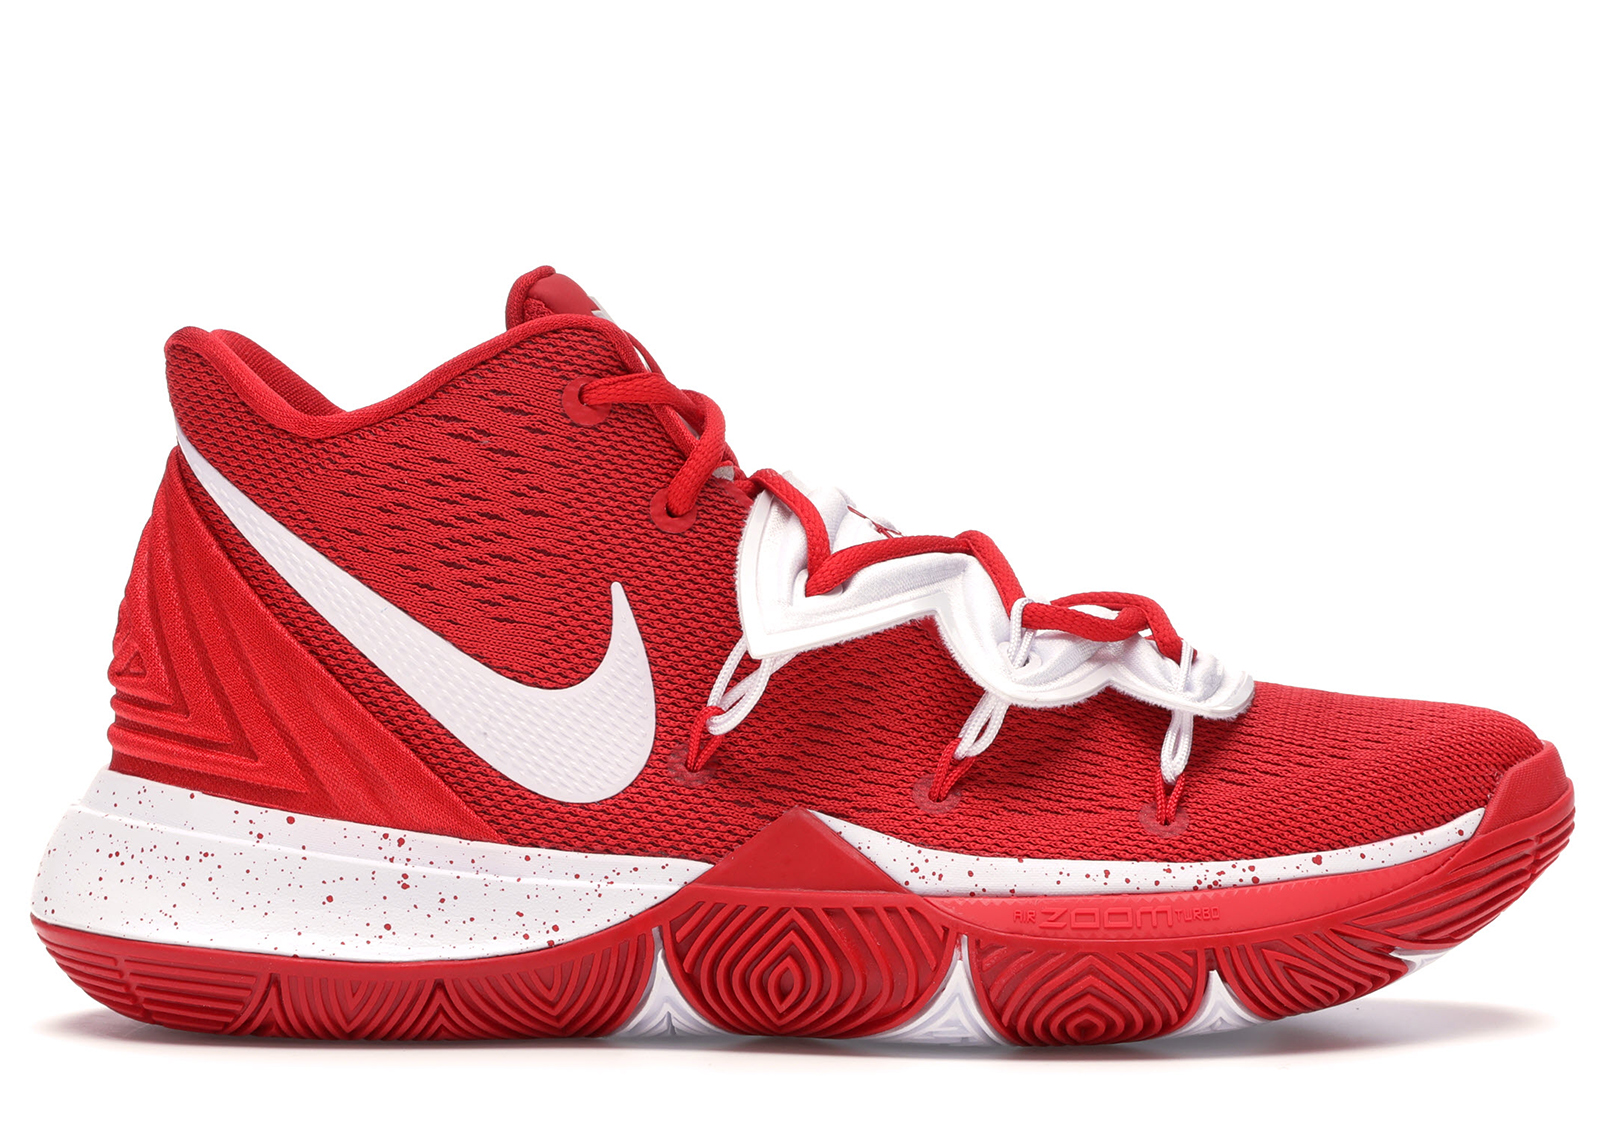 red white kyrie 5